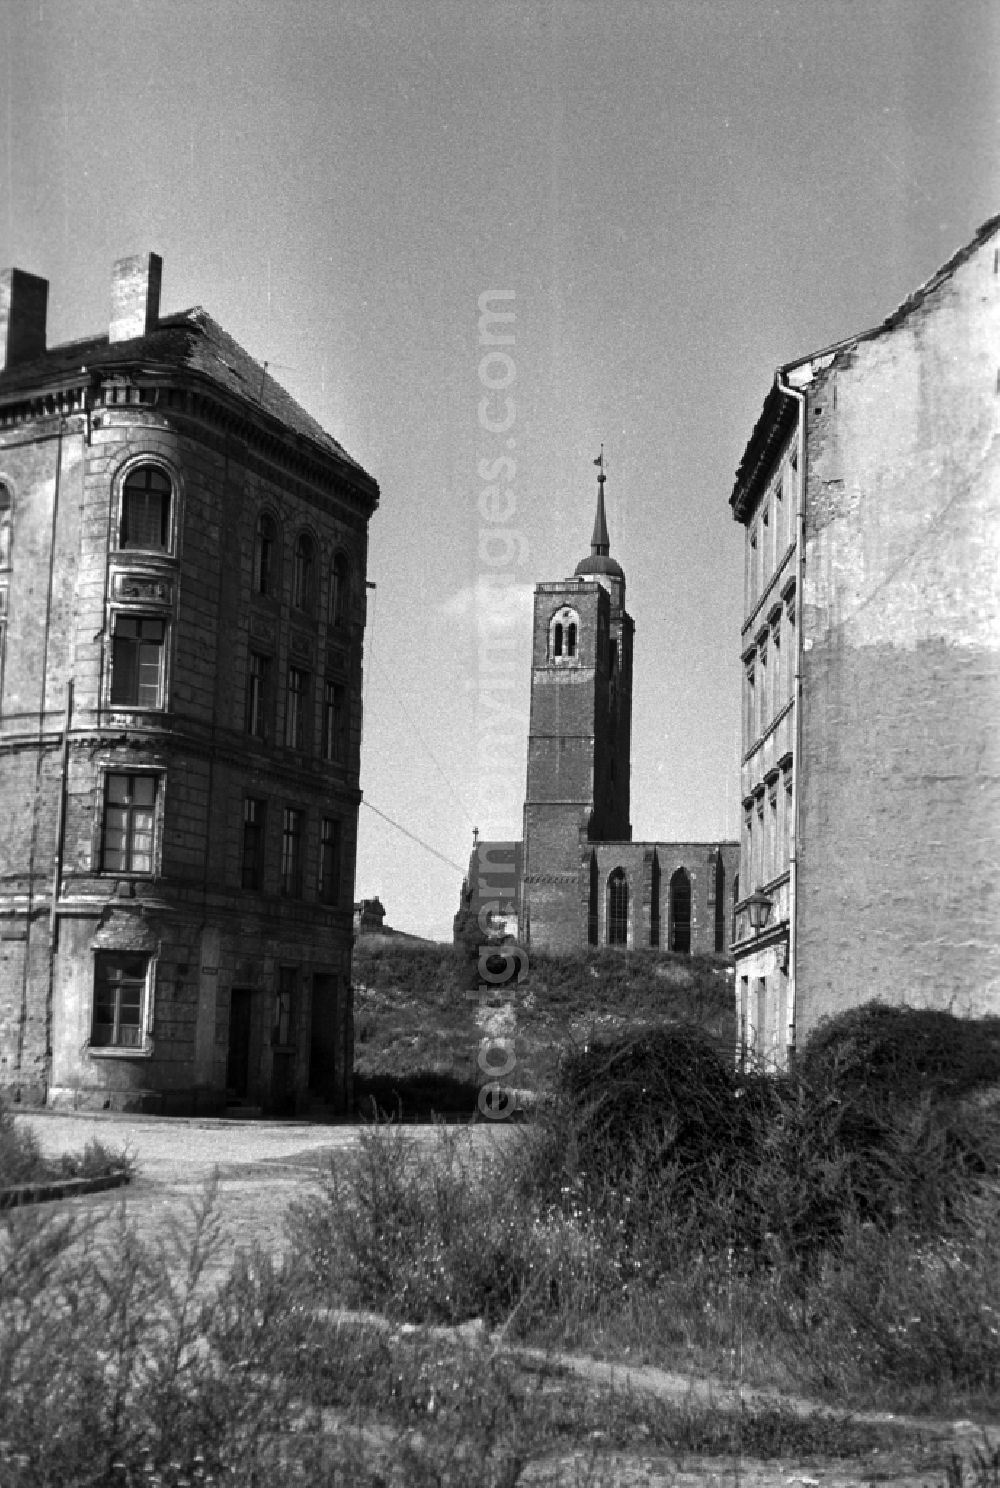 GDR image archive: Magdeburg - View of the west side of St. John's church by two old buildings in Magdeburg